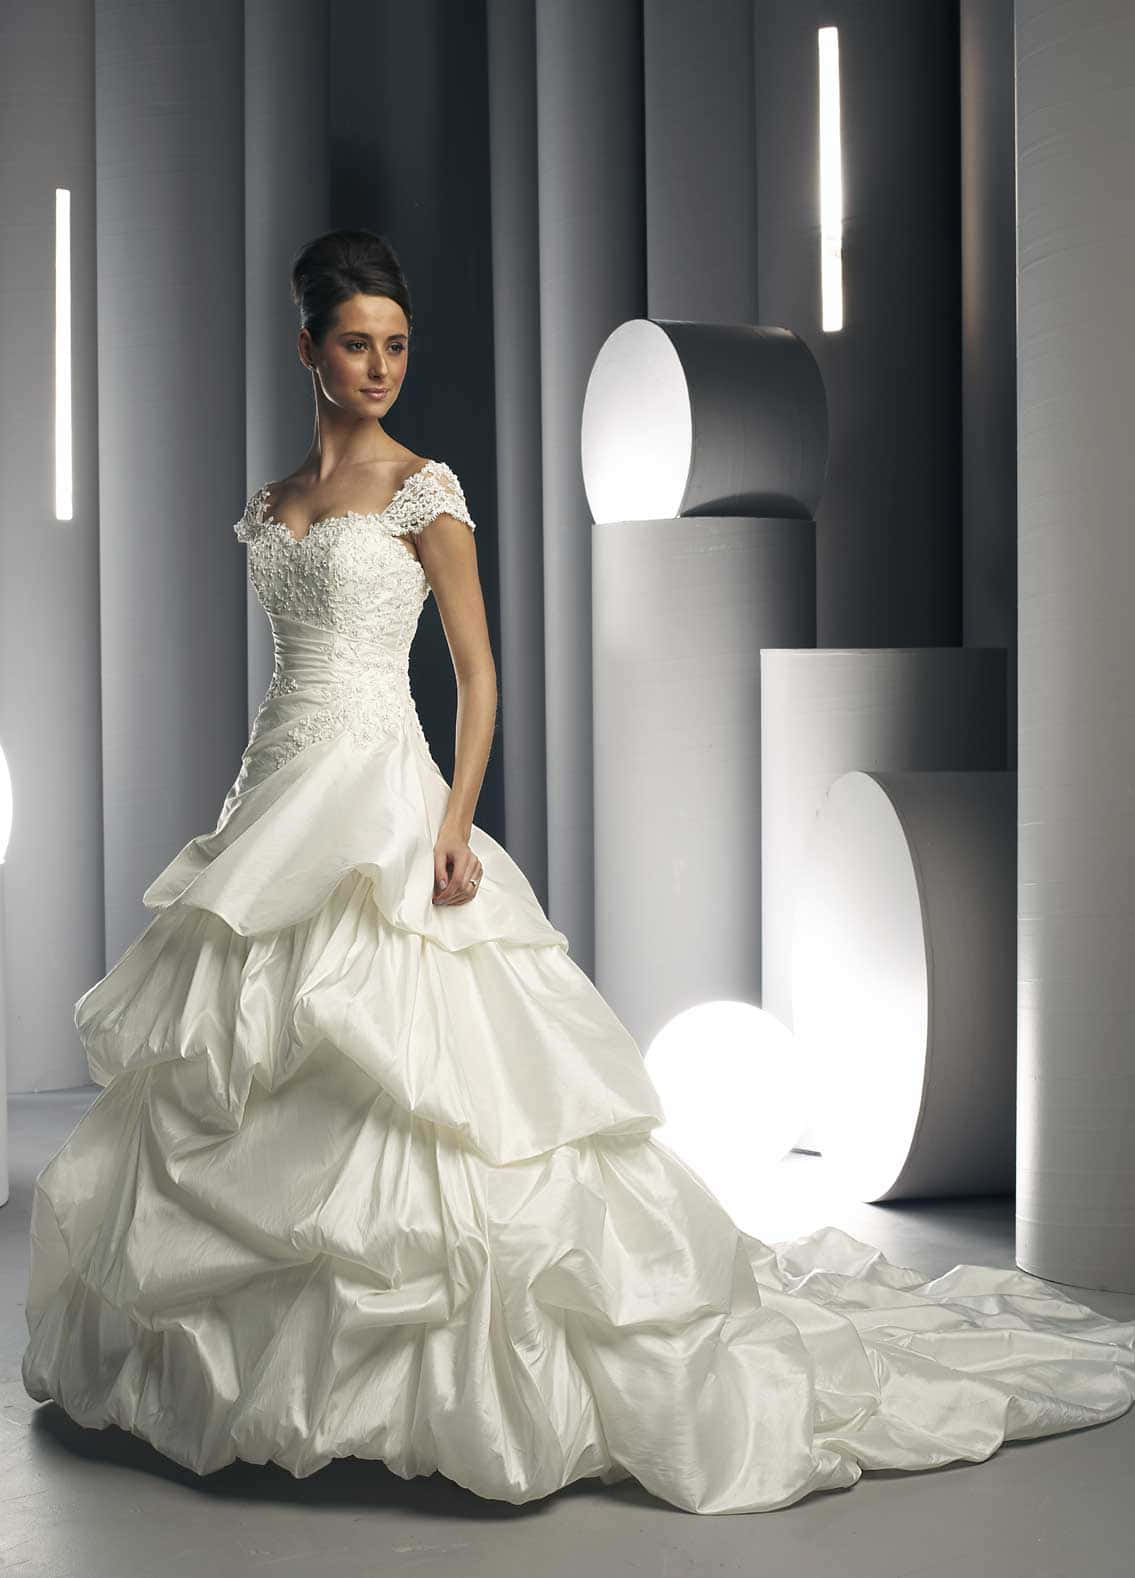 Celebrate your big day in this beautiful wedding gown.